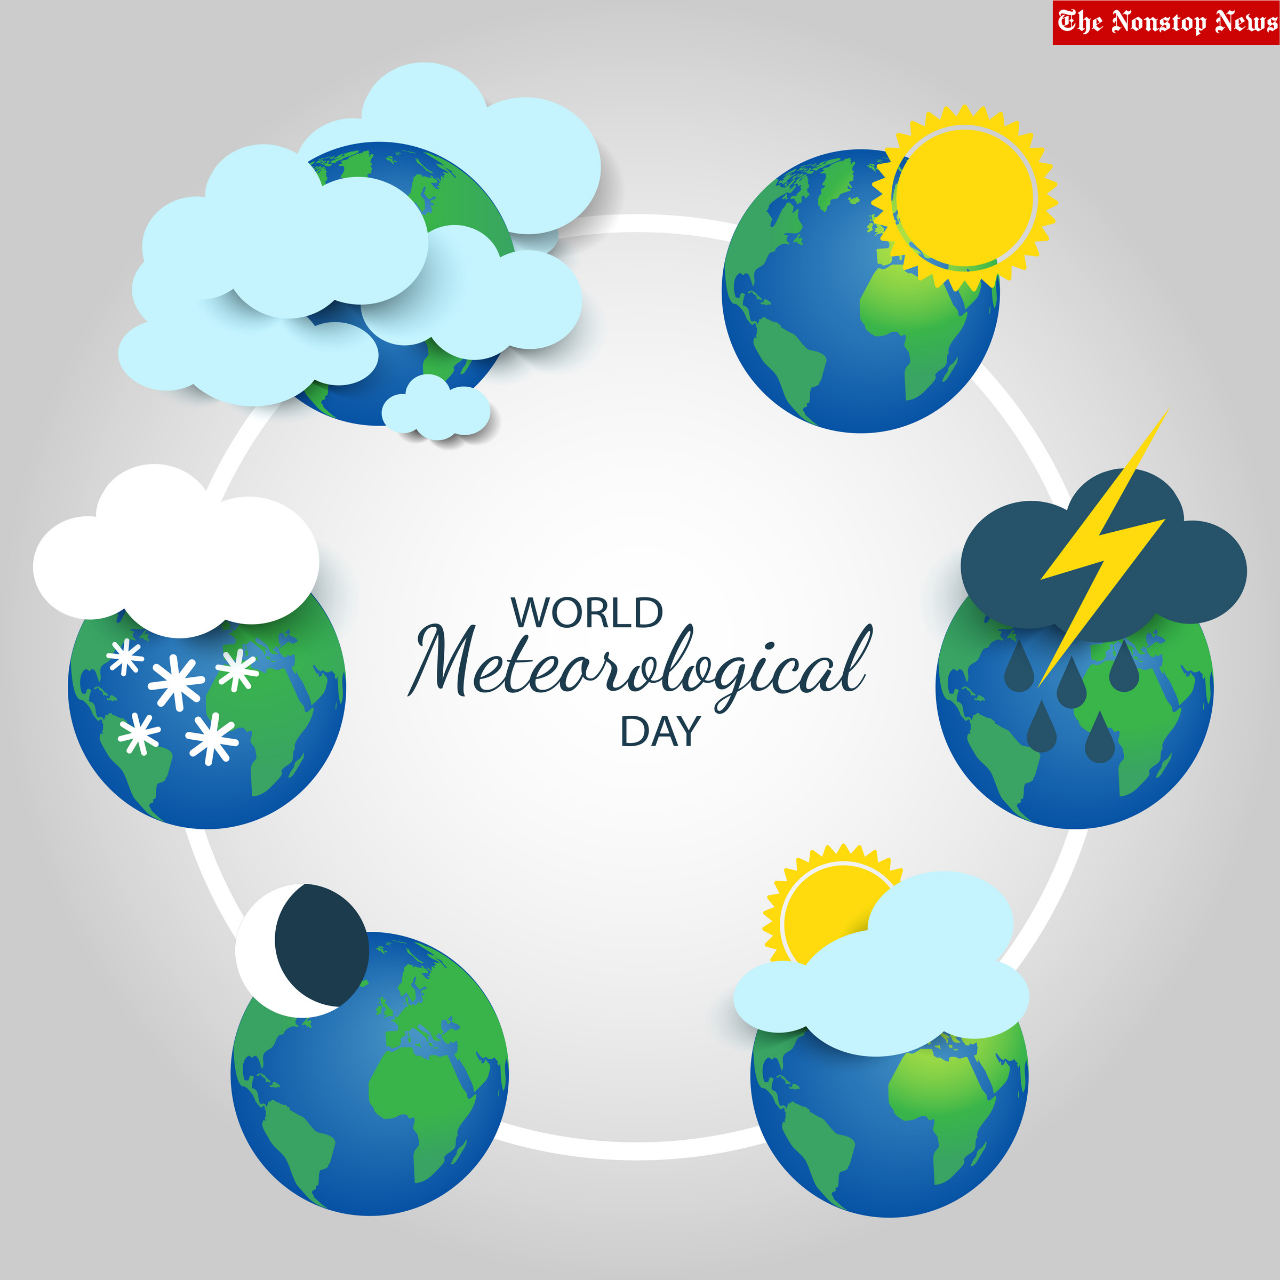 World Meteorological Day 2022 Quotes, Slogans, HD Images, Messages, Posters to Share